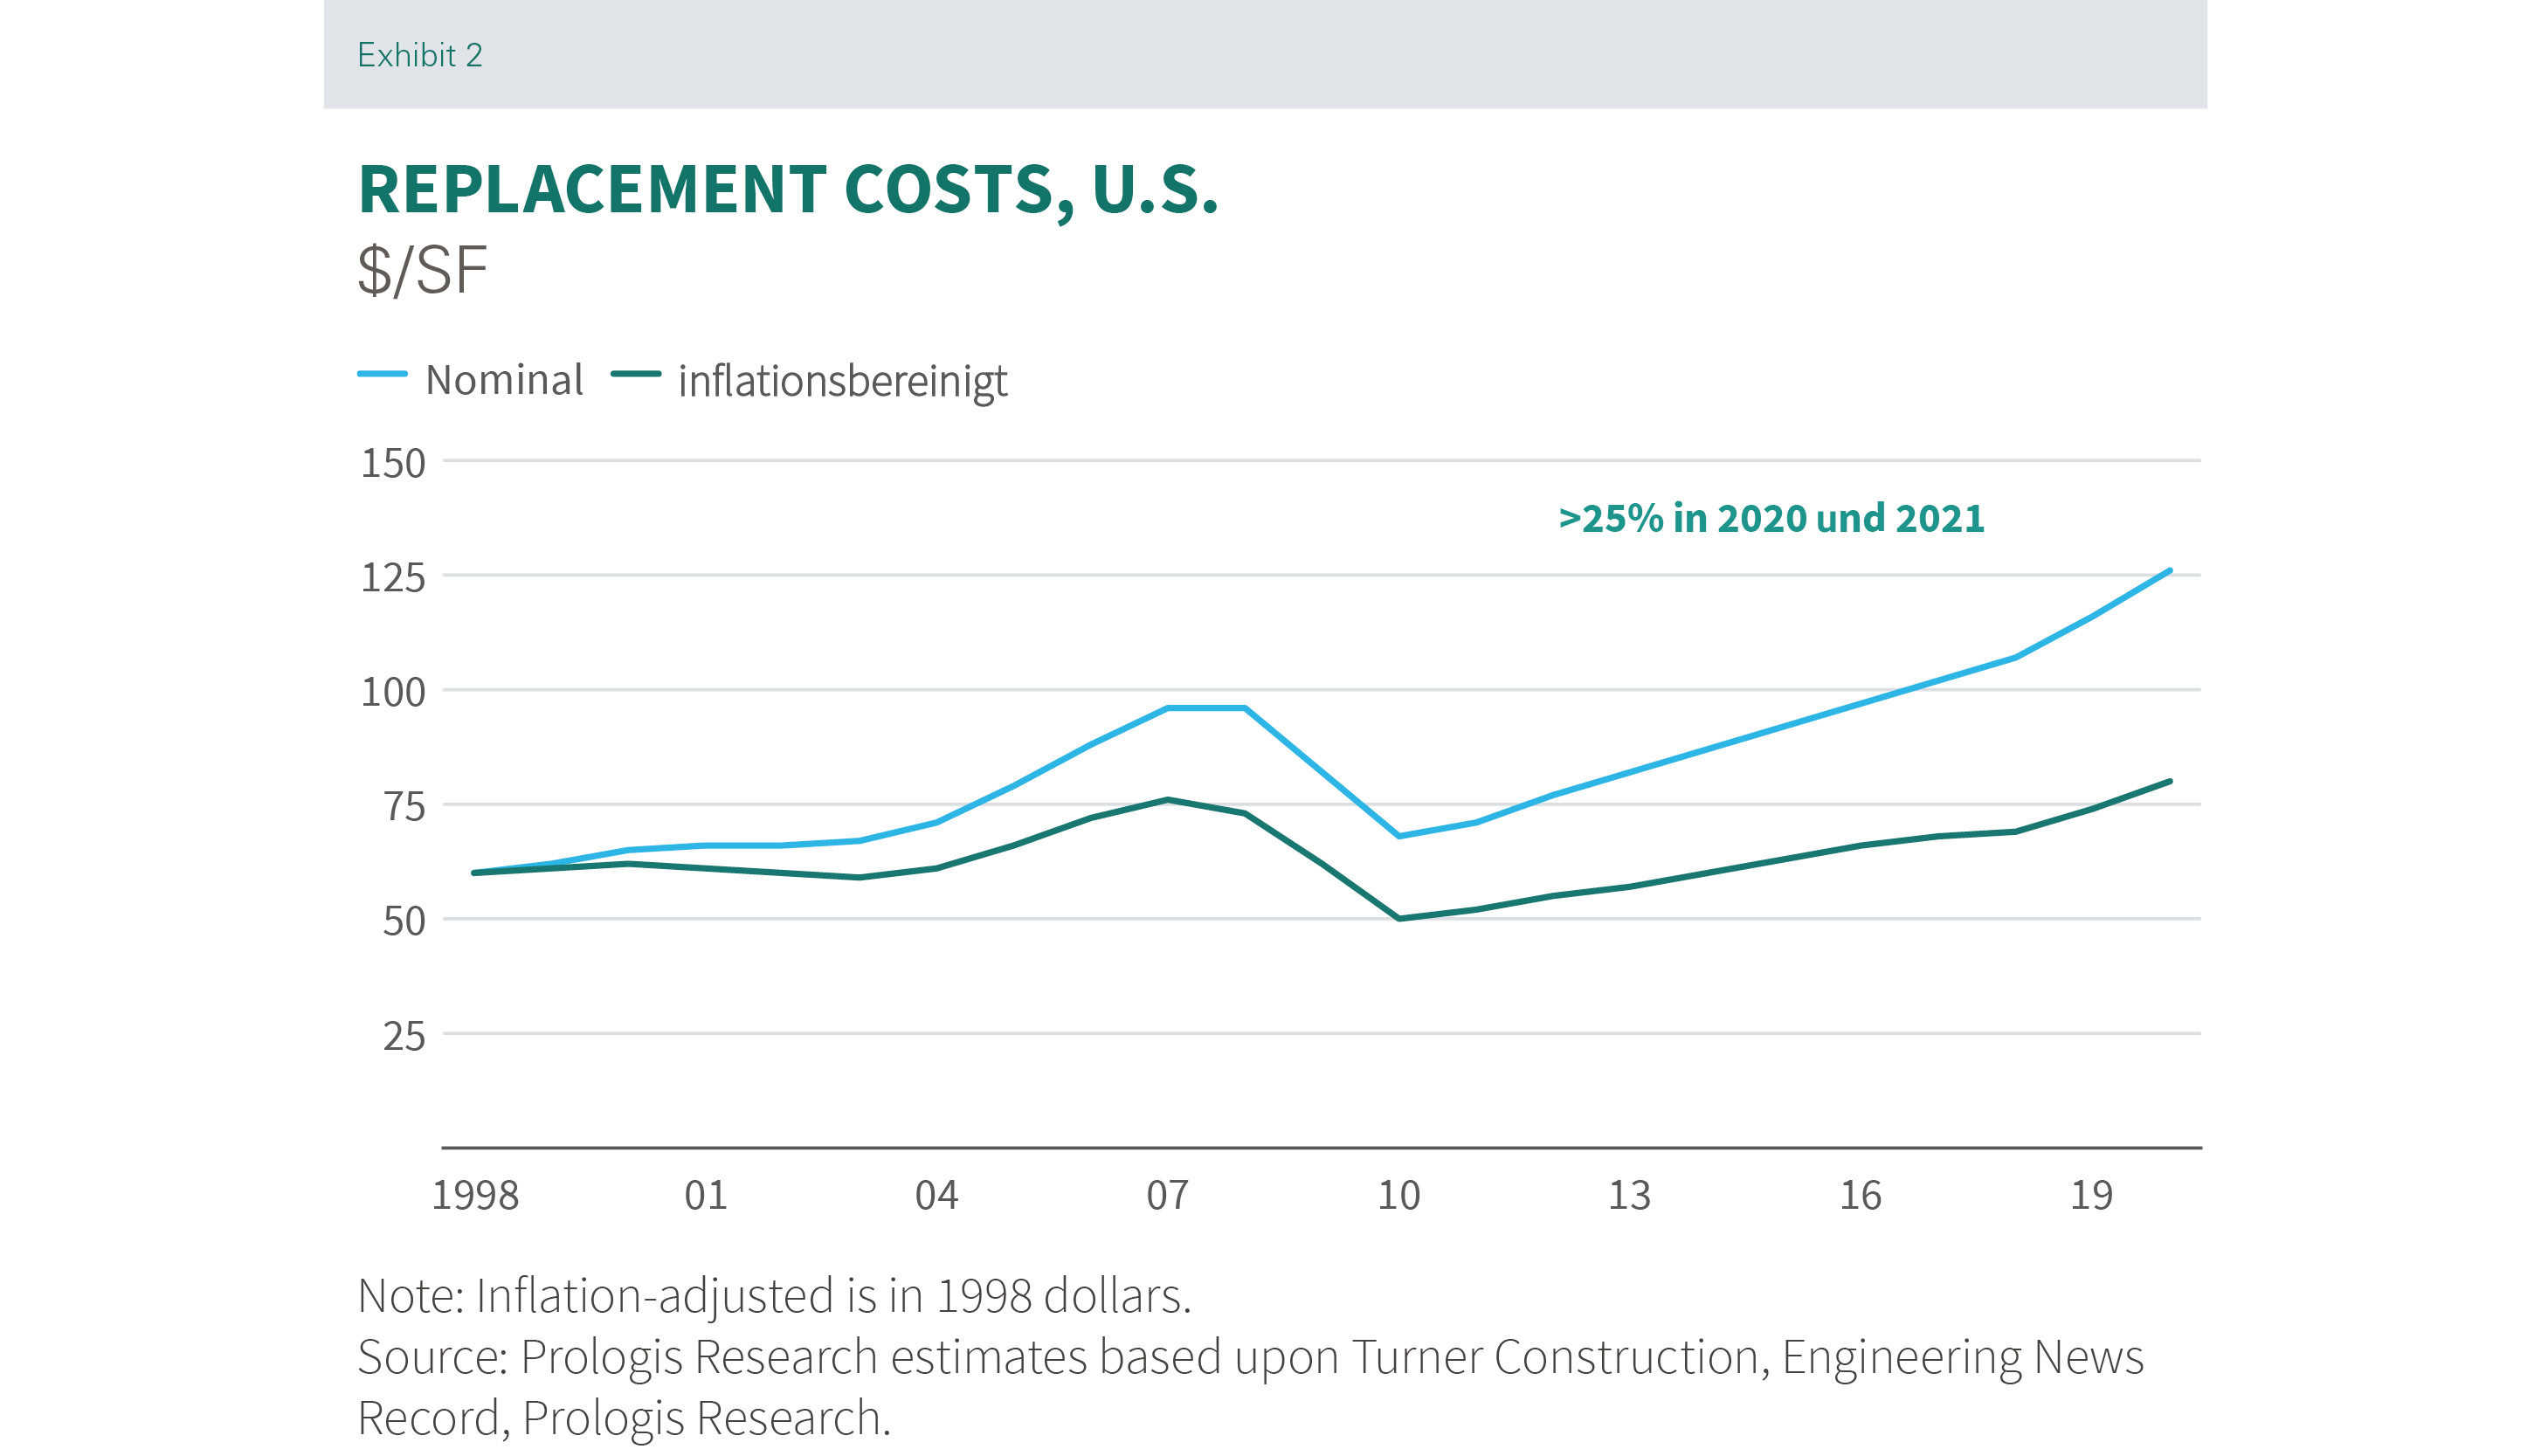 Prologis Research_Paper_Replacement costs_US